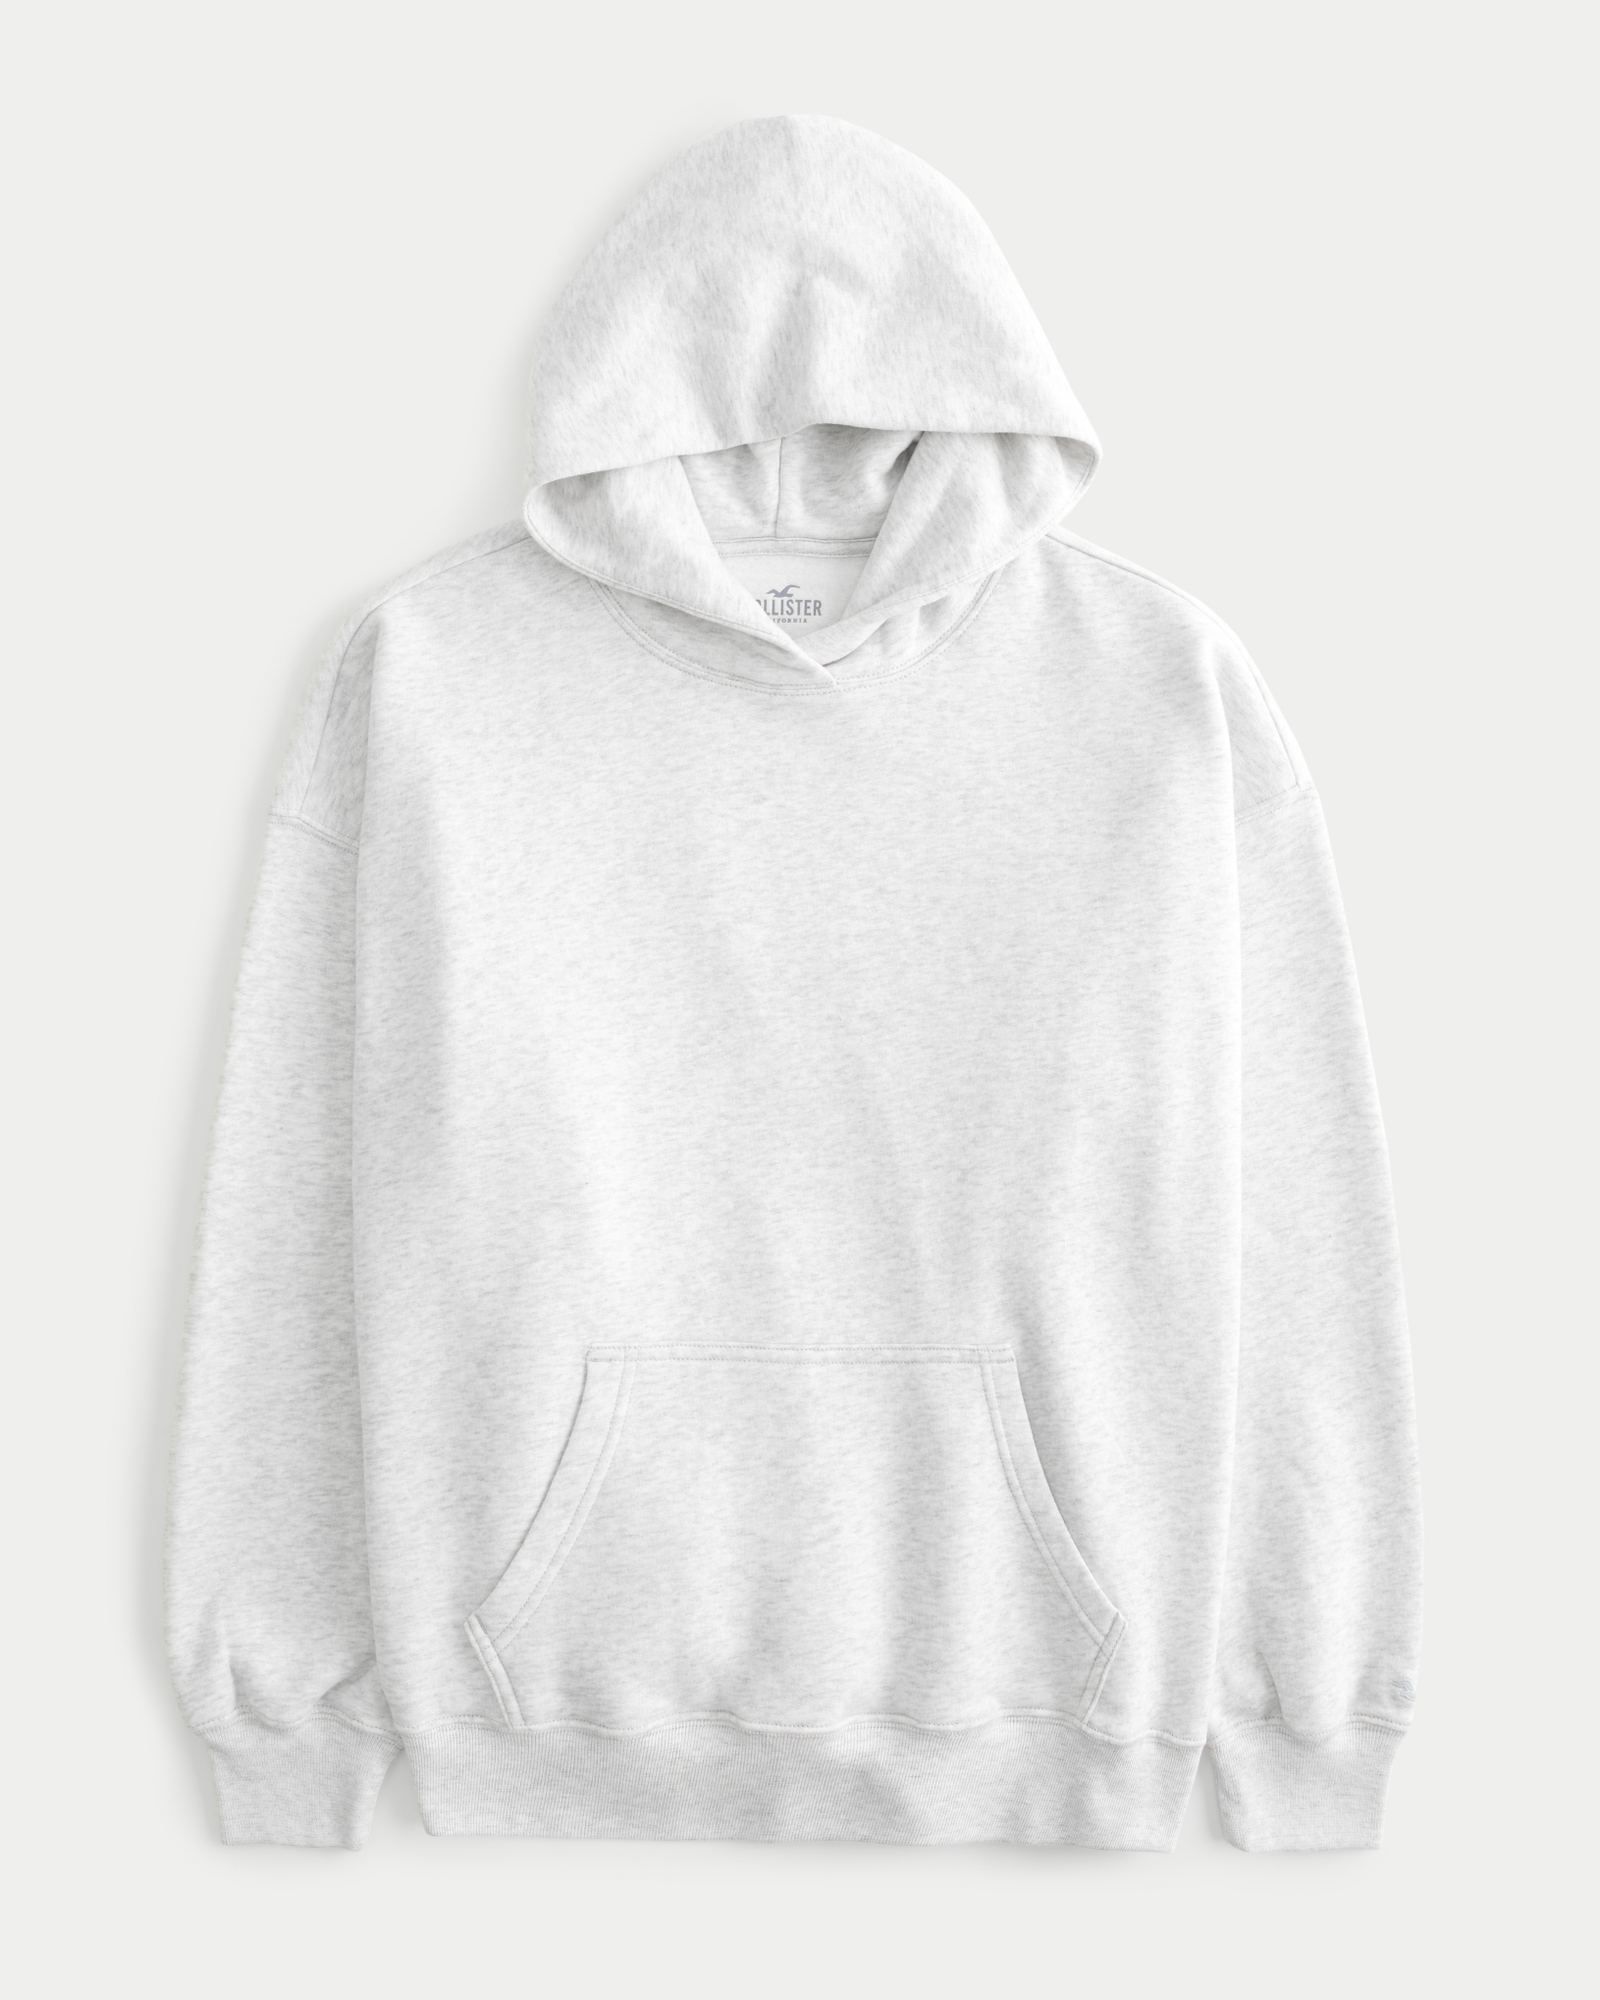 https://img.hollisterco.com/is/image/anf/KIC_352-3157-0027-112_prod1.jpg?policy=product-extra-large